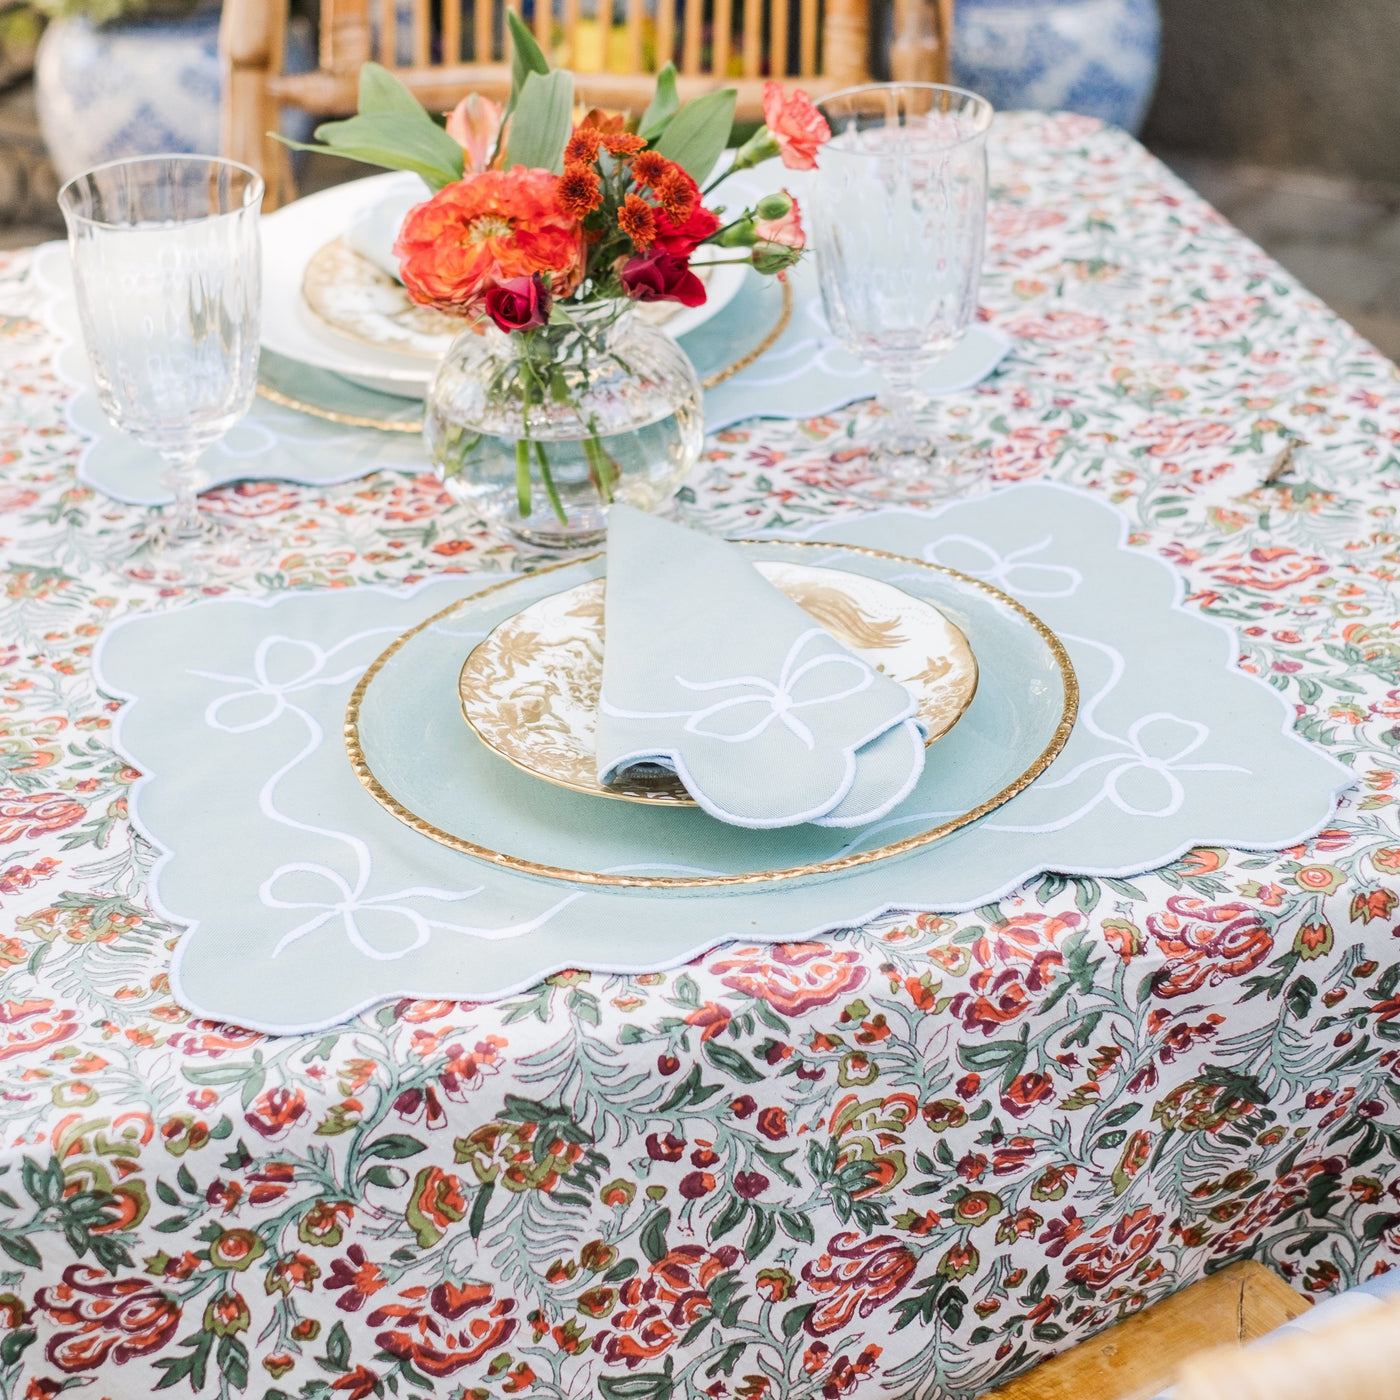 Wild Berries Tablecloth